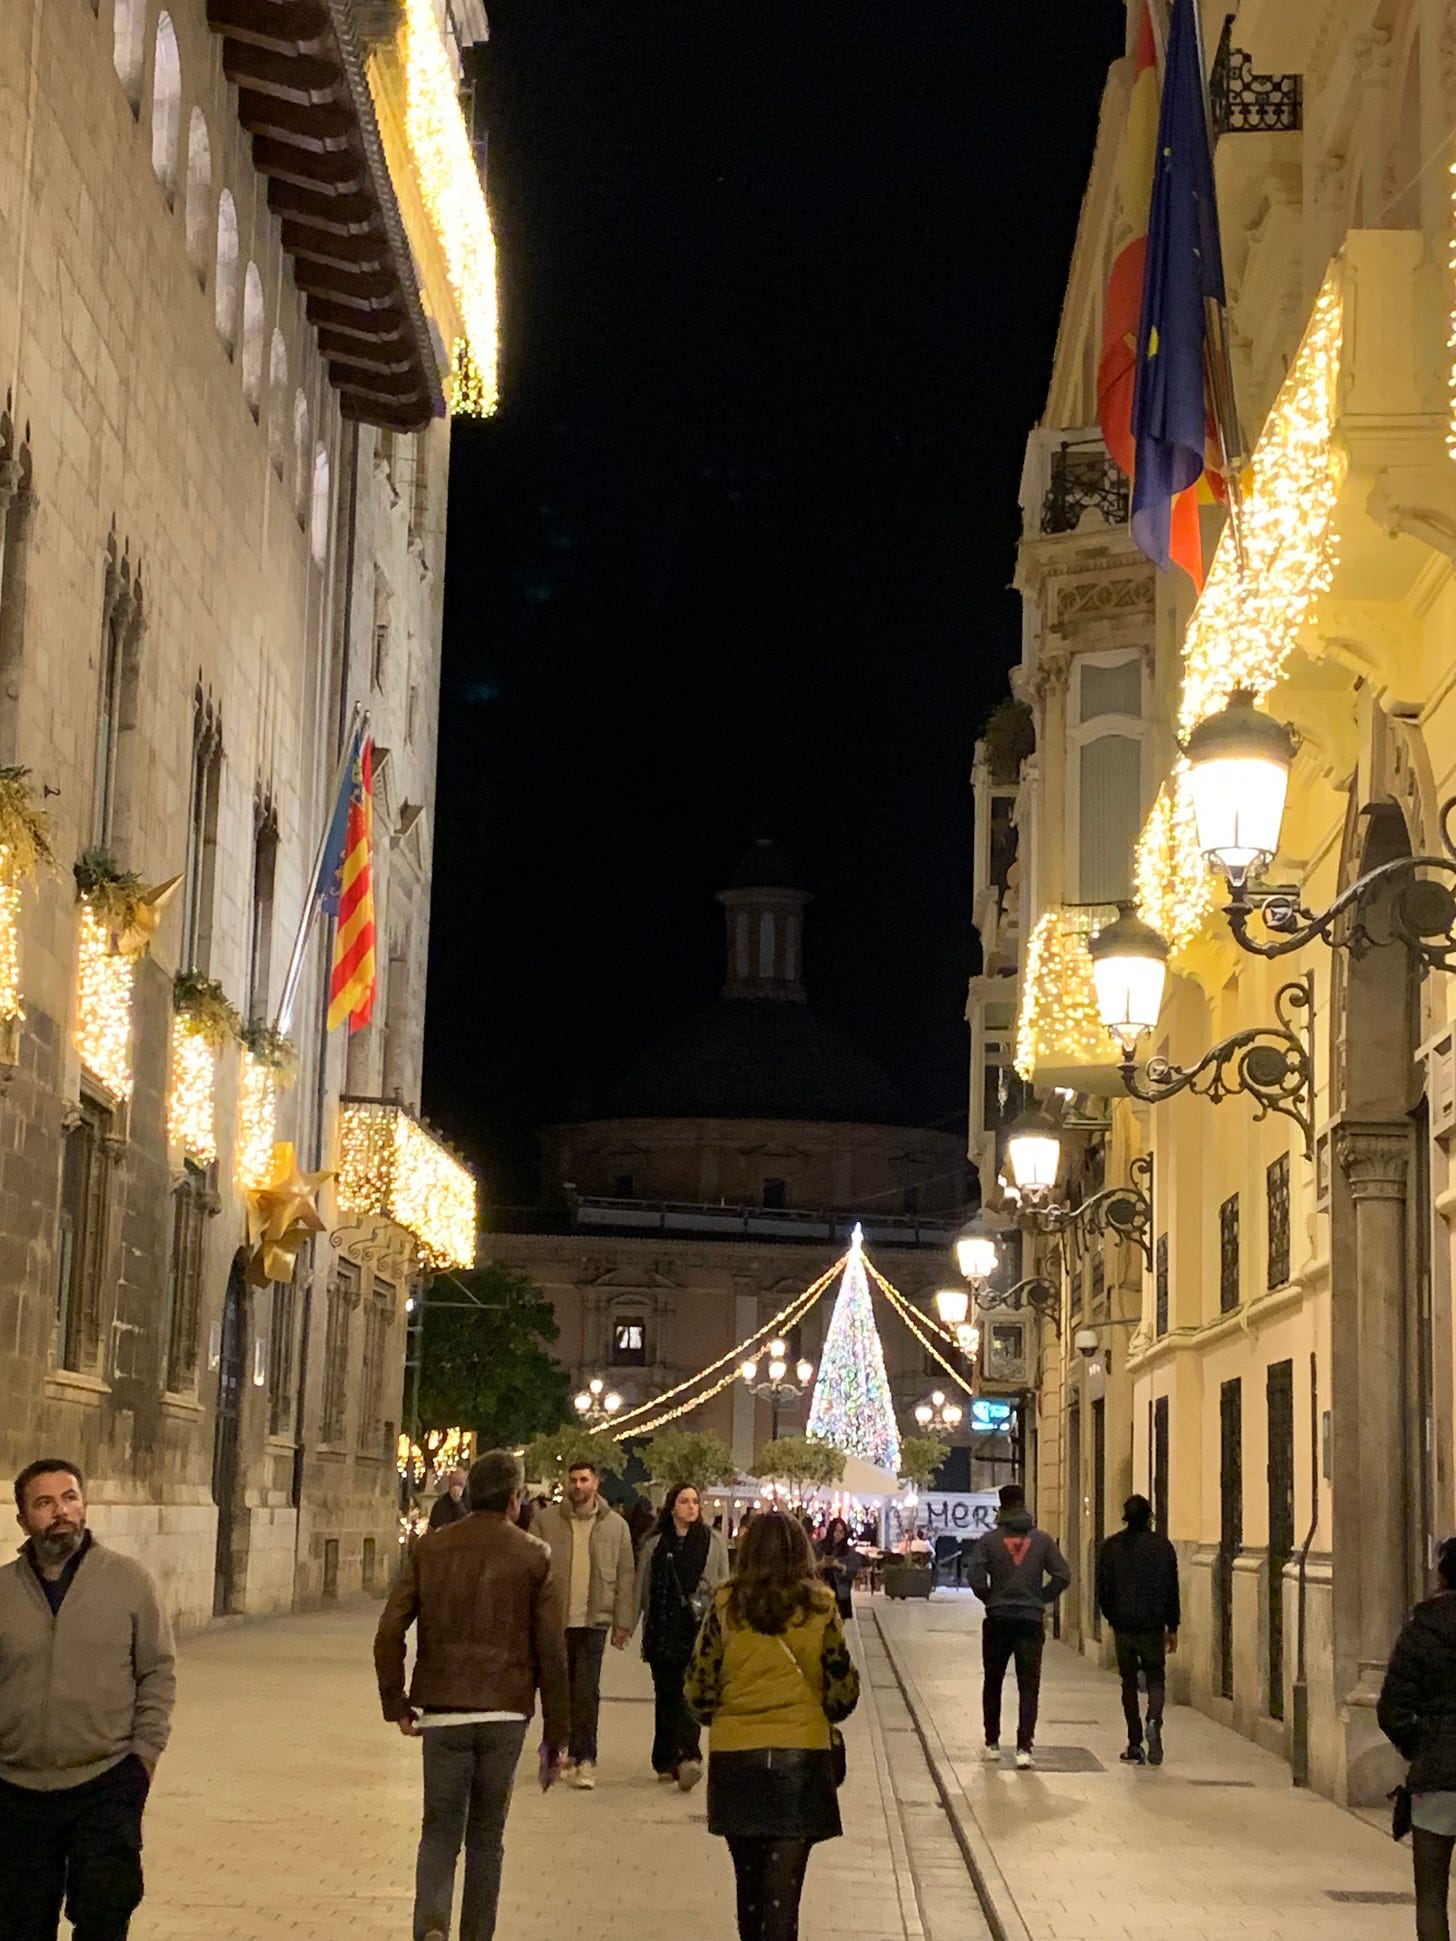 The buildings on both sides of the street are covered in lights as we look towards the Plaza de Virgin